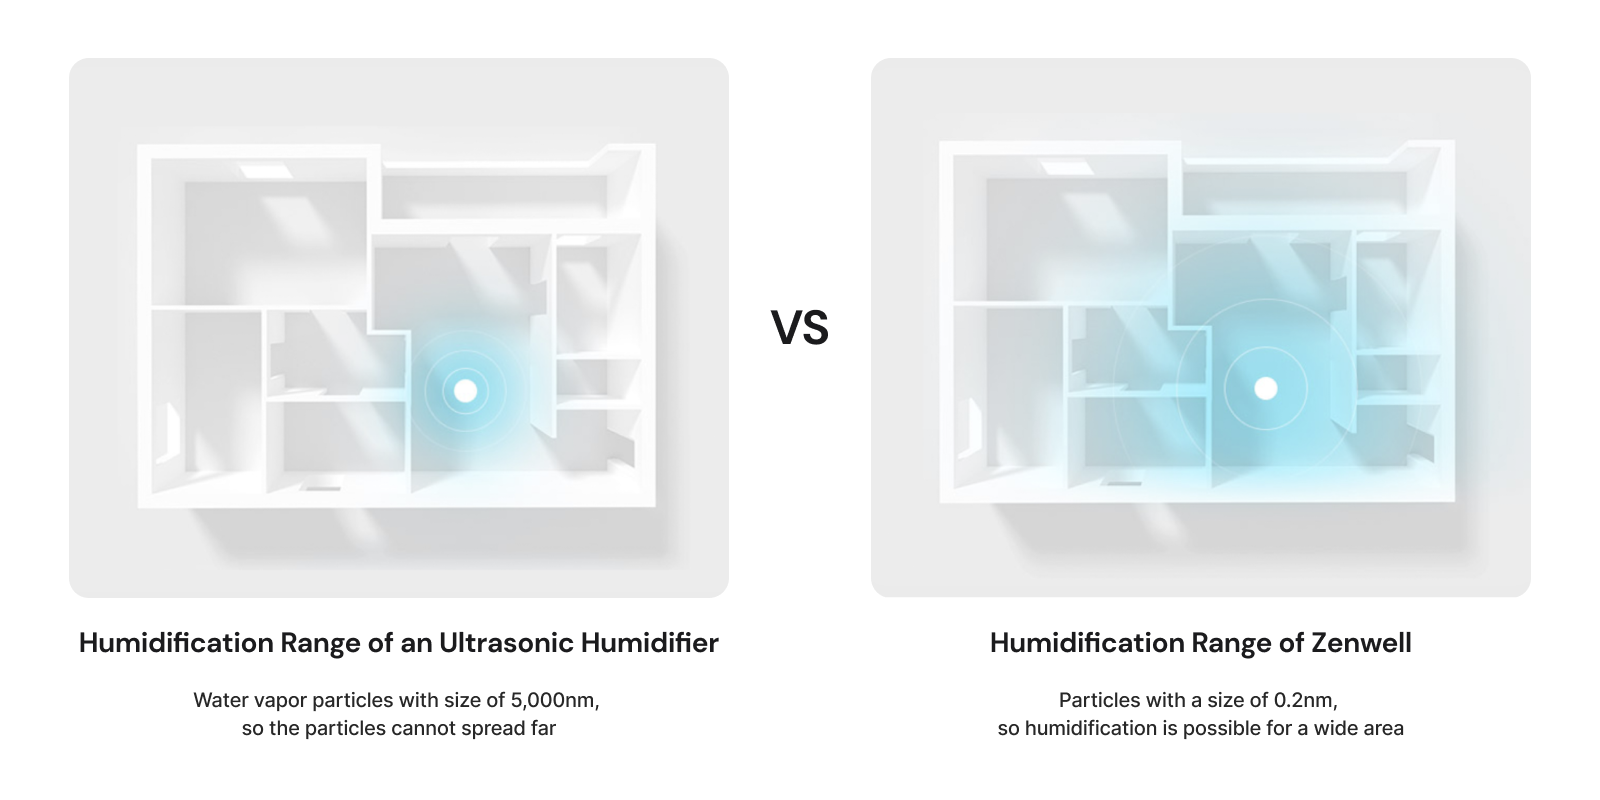 Pictures of floor plans showing smaller coverage area of ultrasonic humidifiers with output of vapor particles with size of 5000 nanometers compared to larger coverage area of Zenwell natural vaporization humidifiers with output of vapor particles with size of 0.2 nanometers